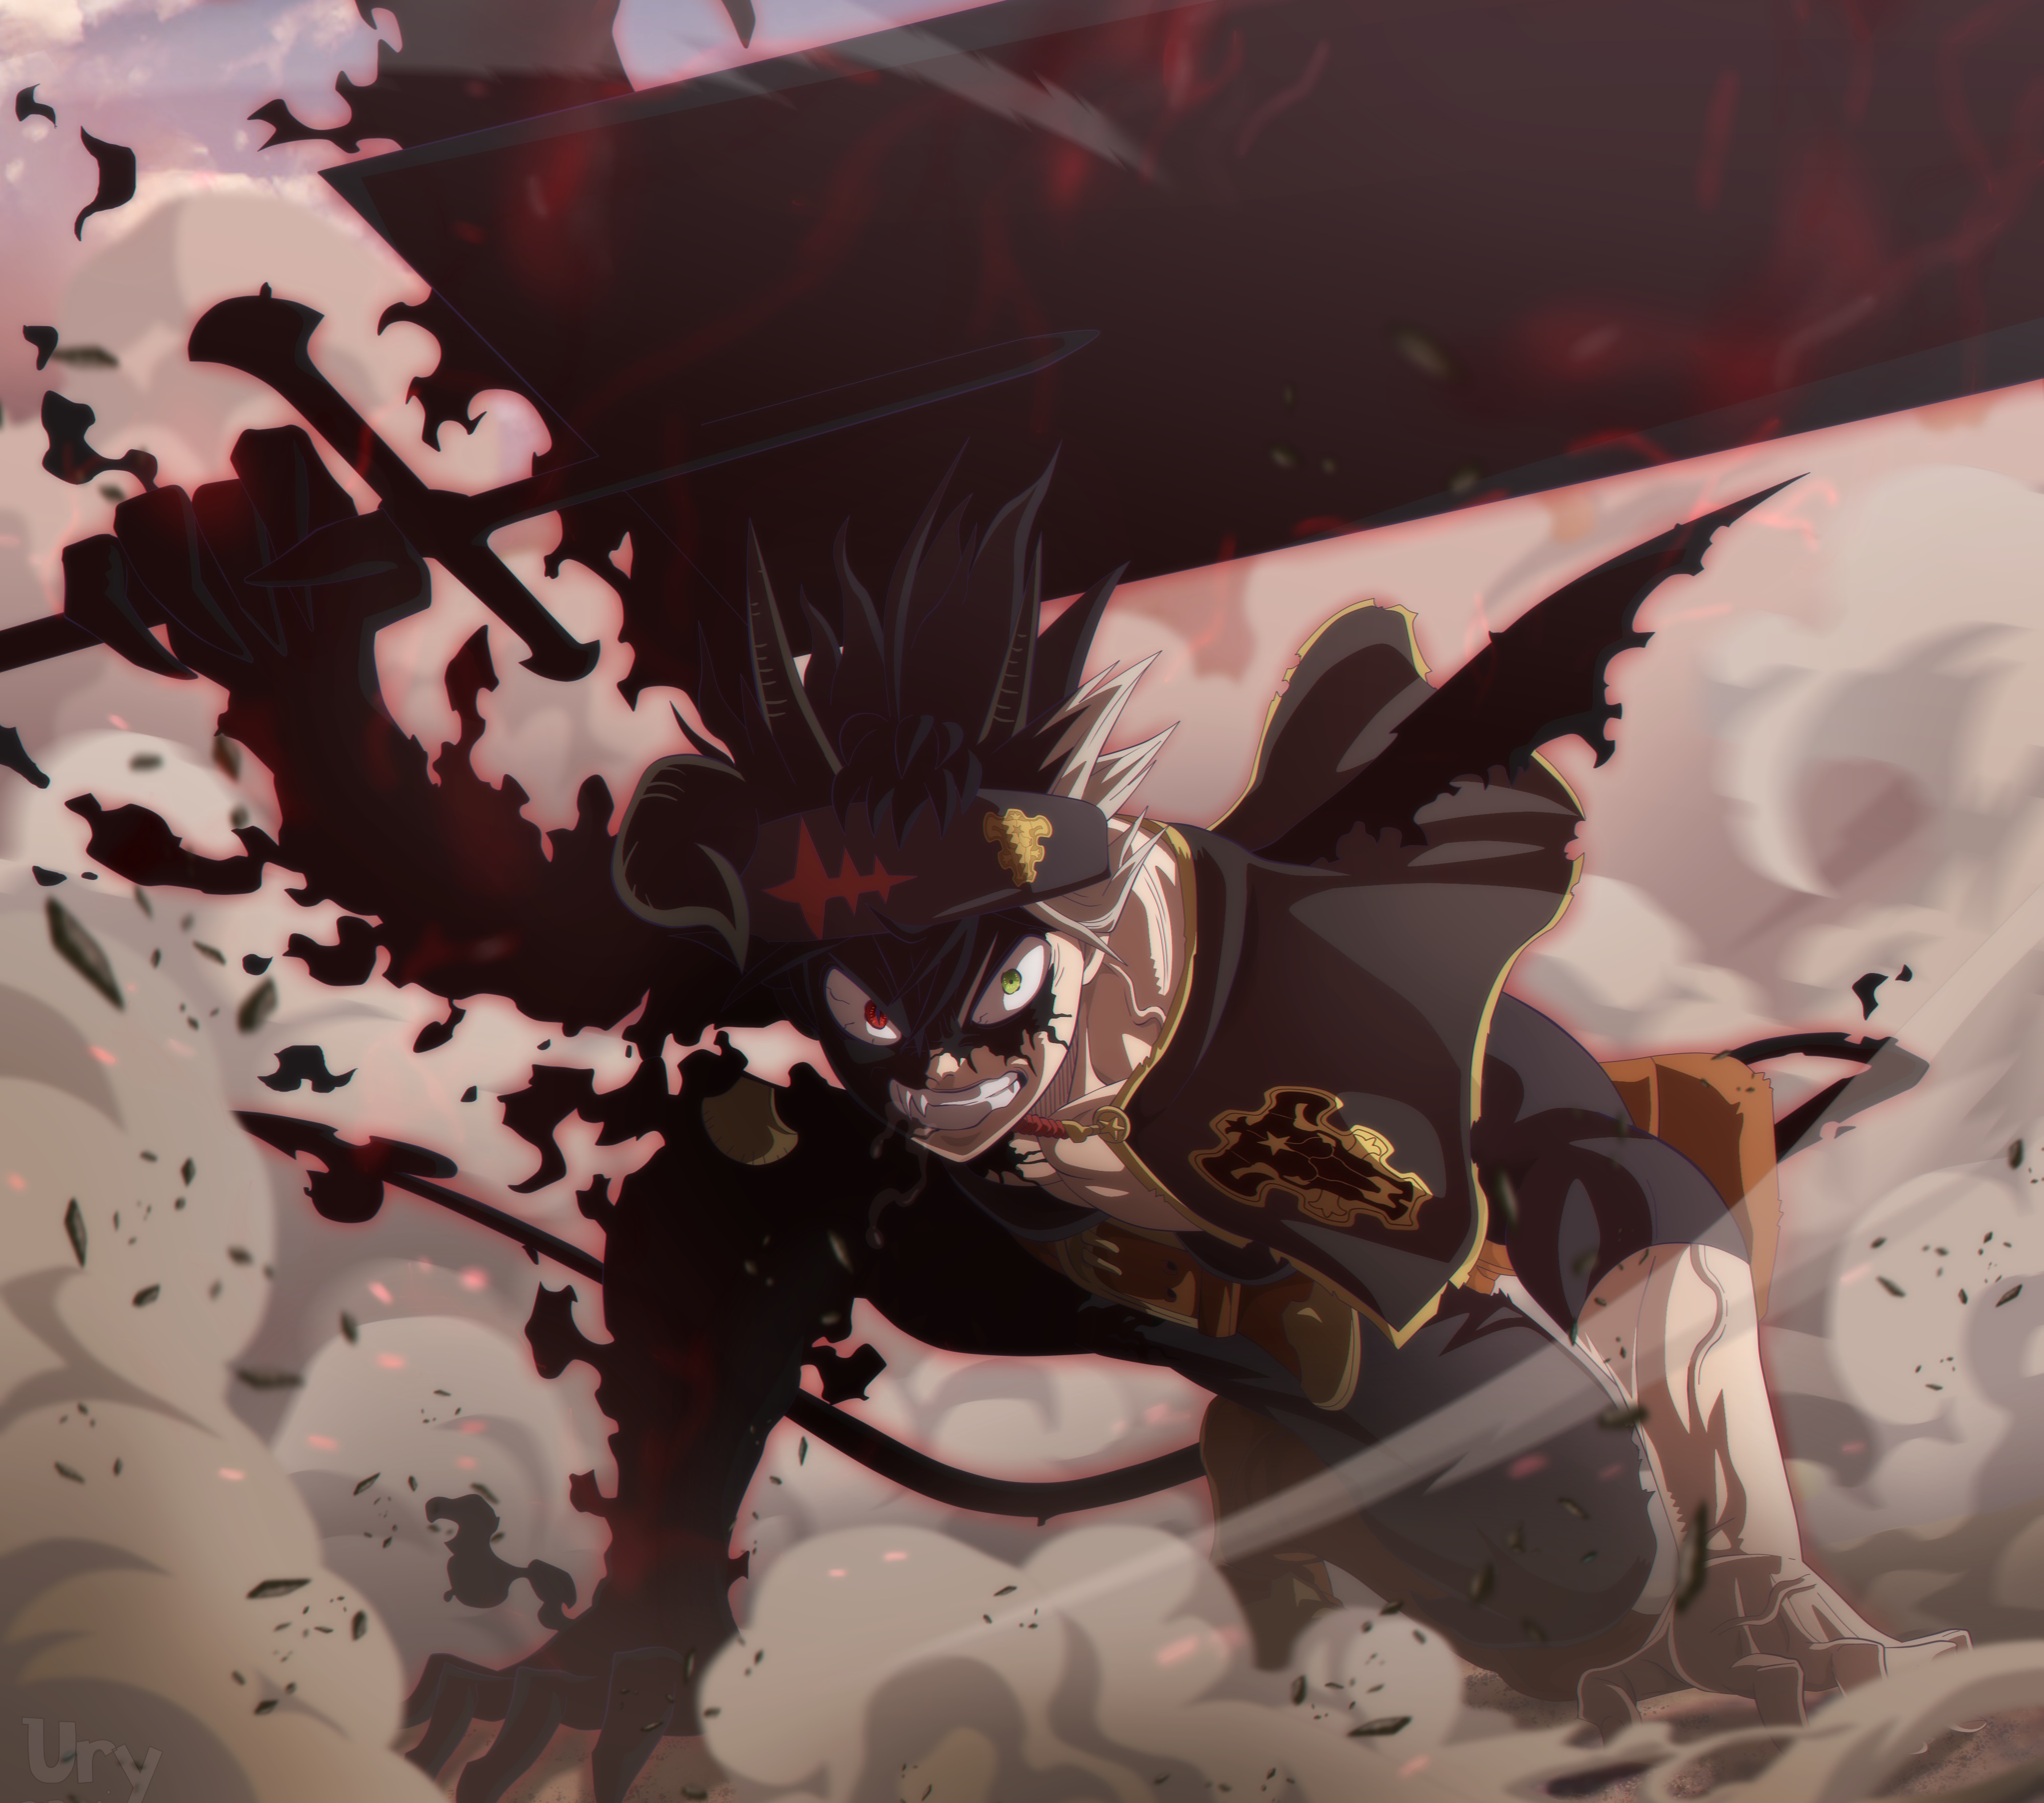 Download Asta (Black Clover) wallpapers for mobile phone, free